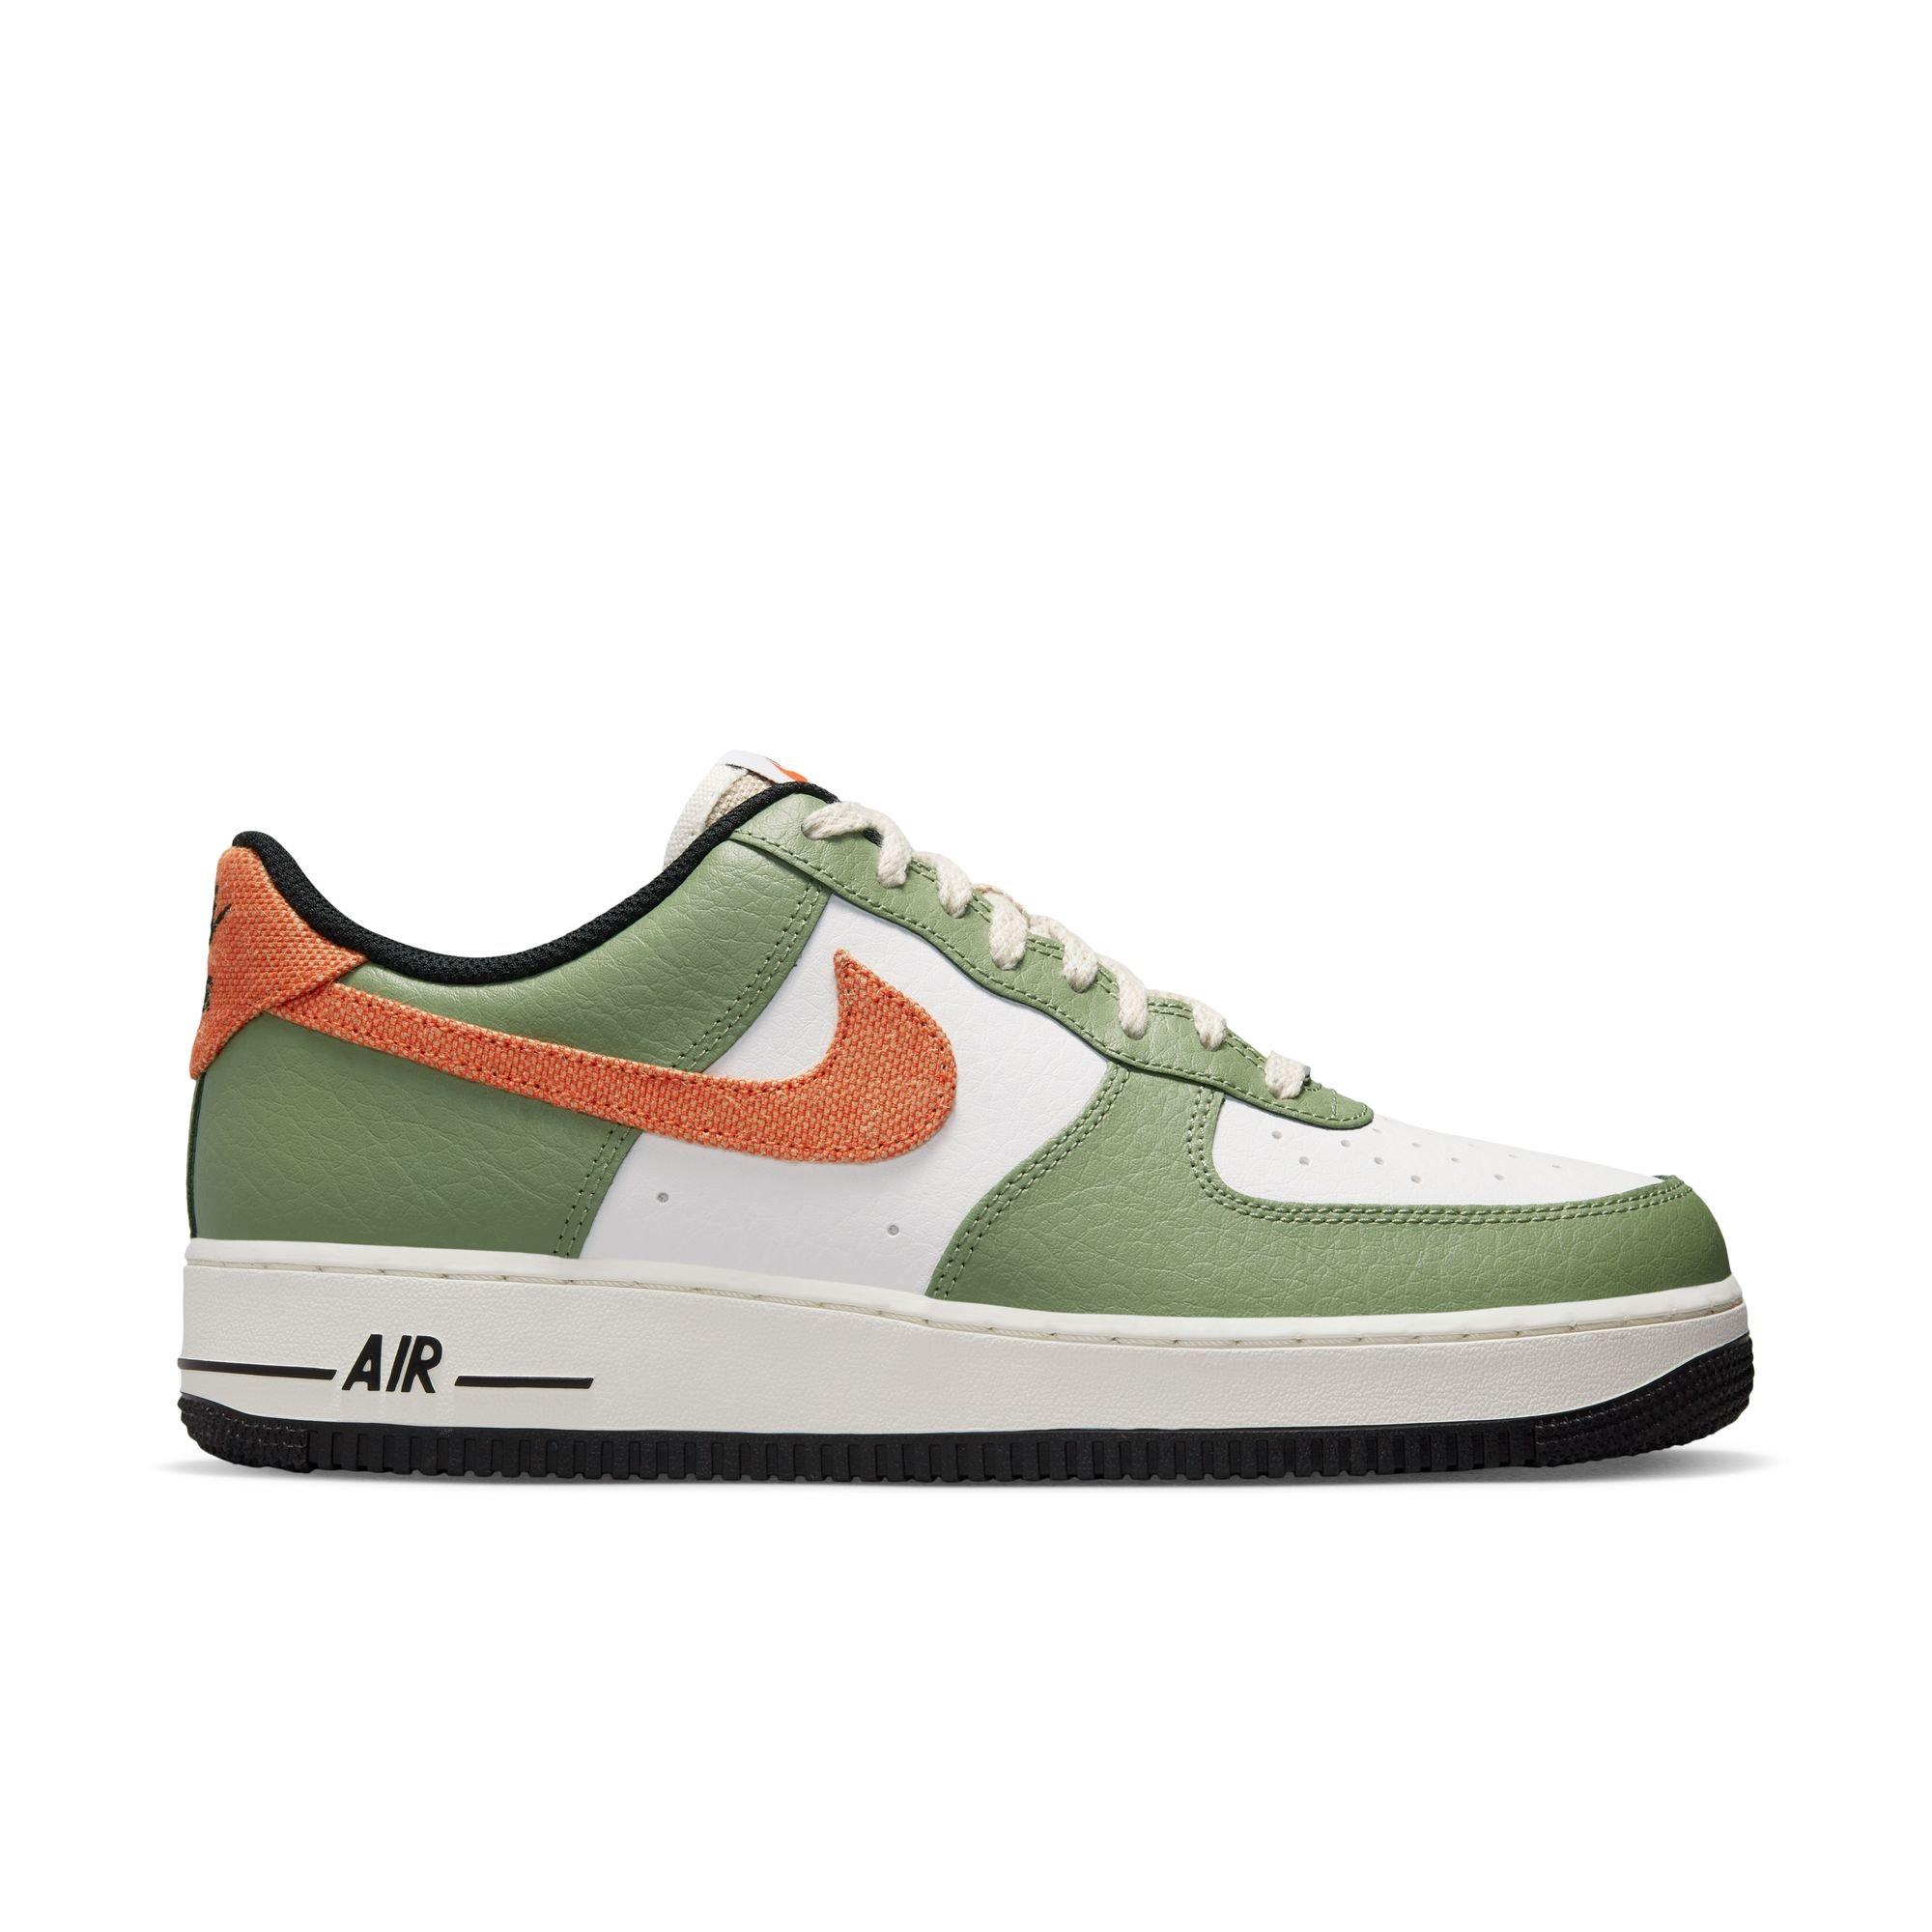 NIKE AIR FORCE 1 LOW - OFF WHITE - LIGHT GREEN SPARK "